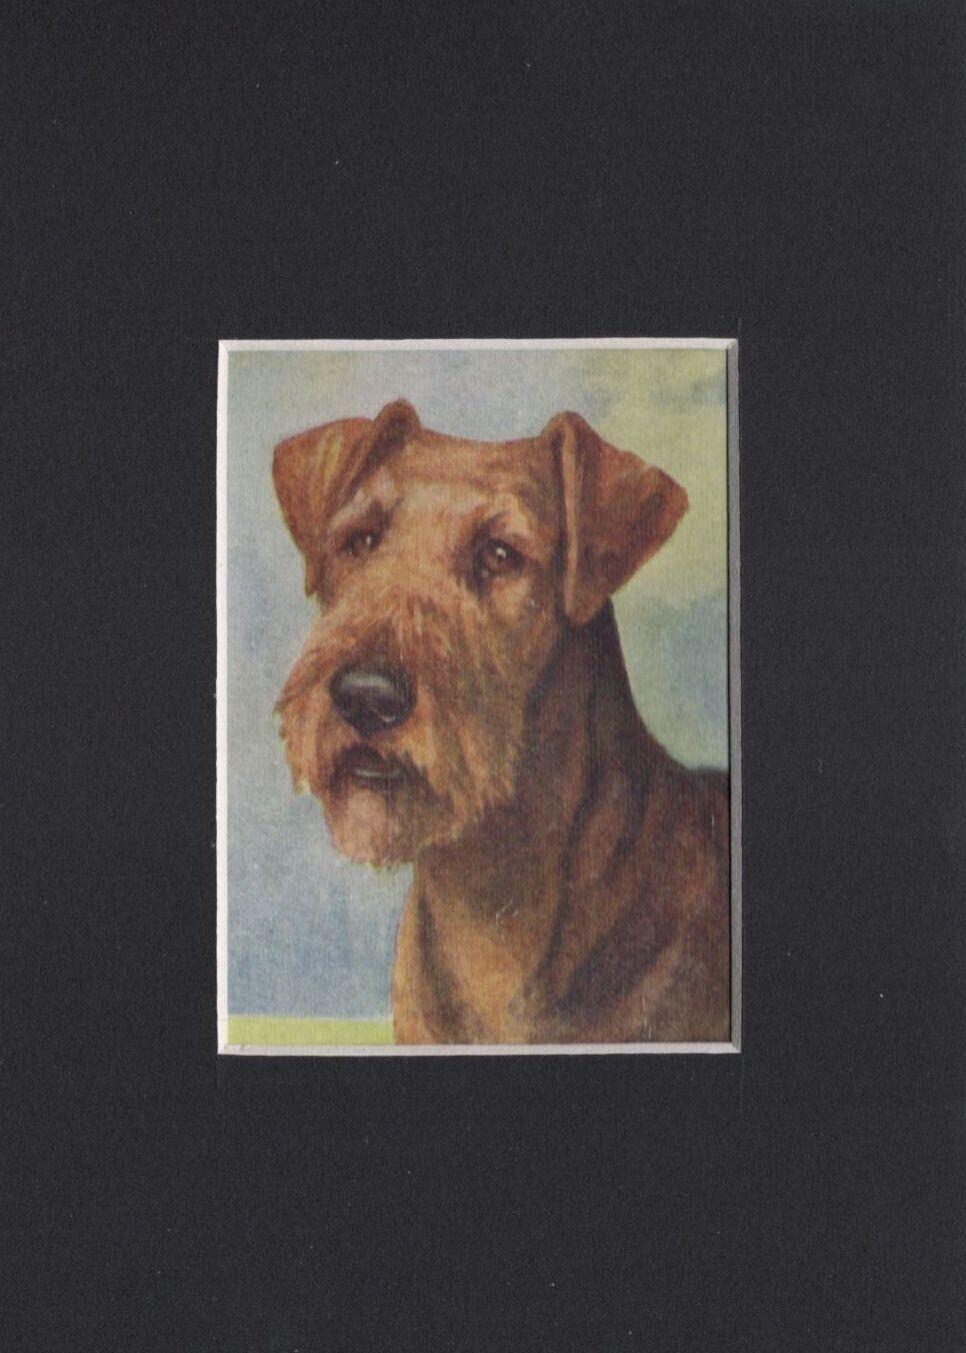 Vintage 1934 Airedale Terrier Print - CUSTOM MATTED - Dog Art Print - Ready Gift